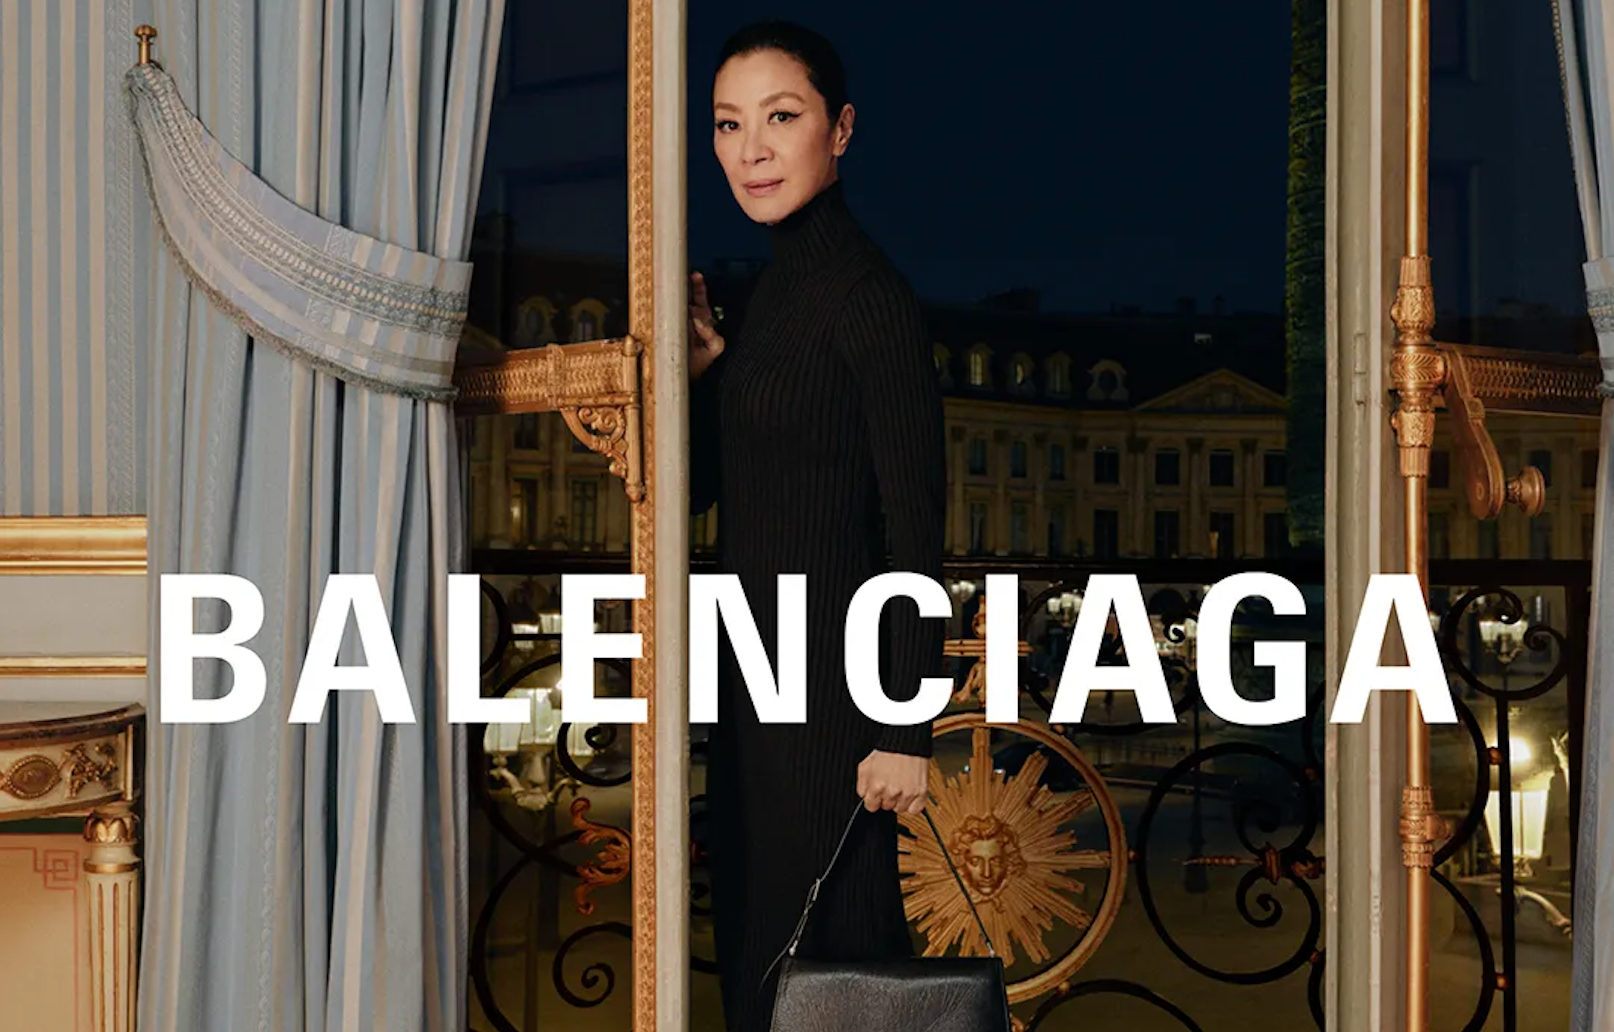 Balenciaga announced its appointment of Michelle Yeoh as brand ambassador on November 9. After losing its grip on the West, can the storied couture house find success in China? Photo: Balenciaga